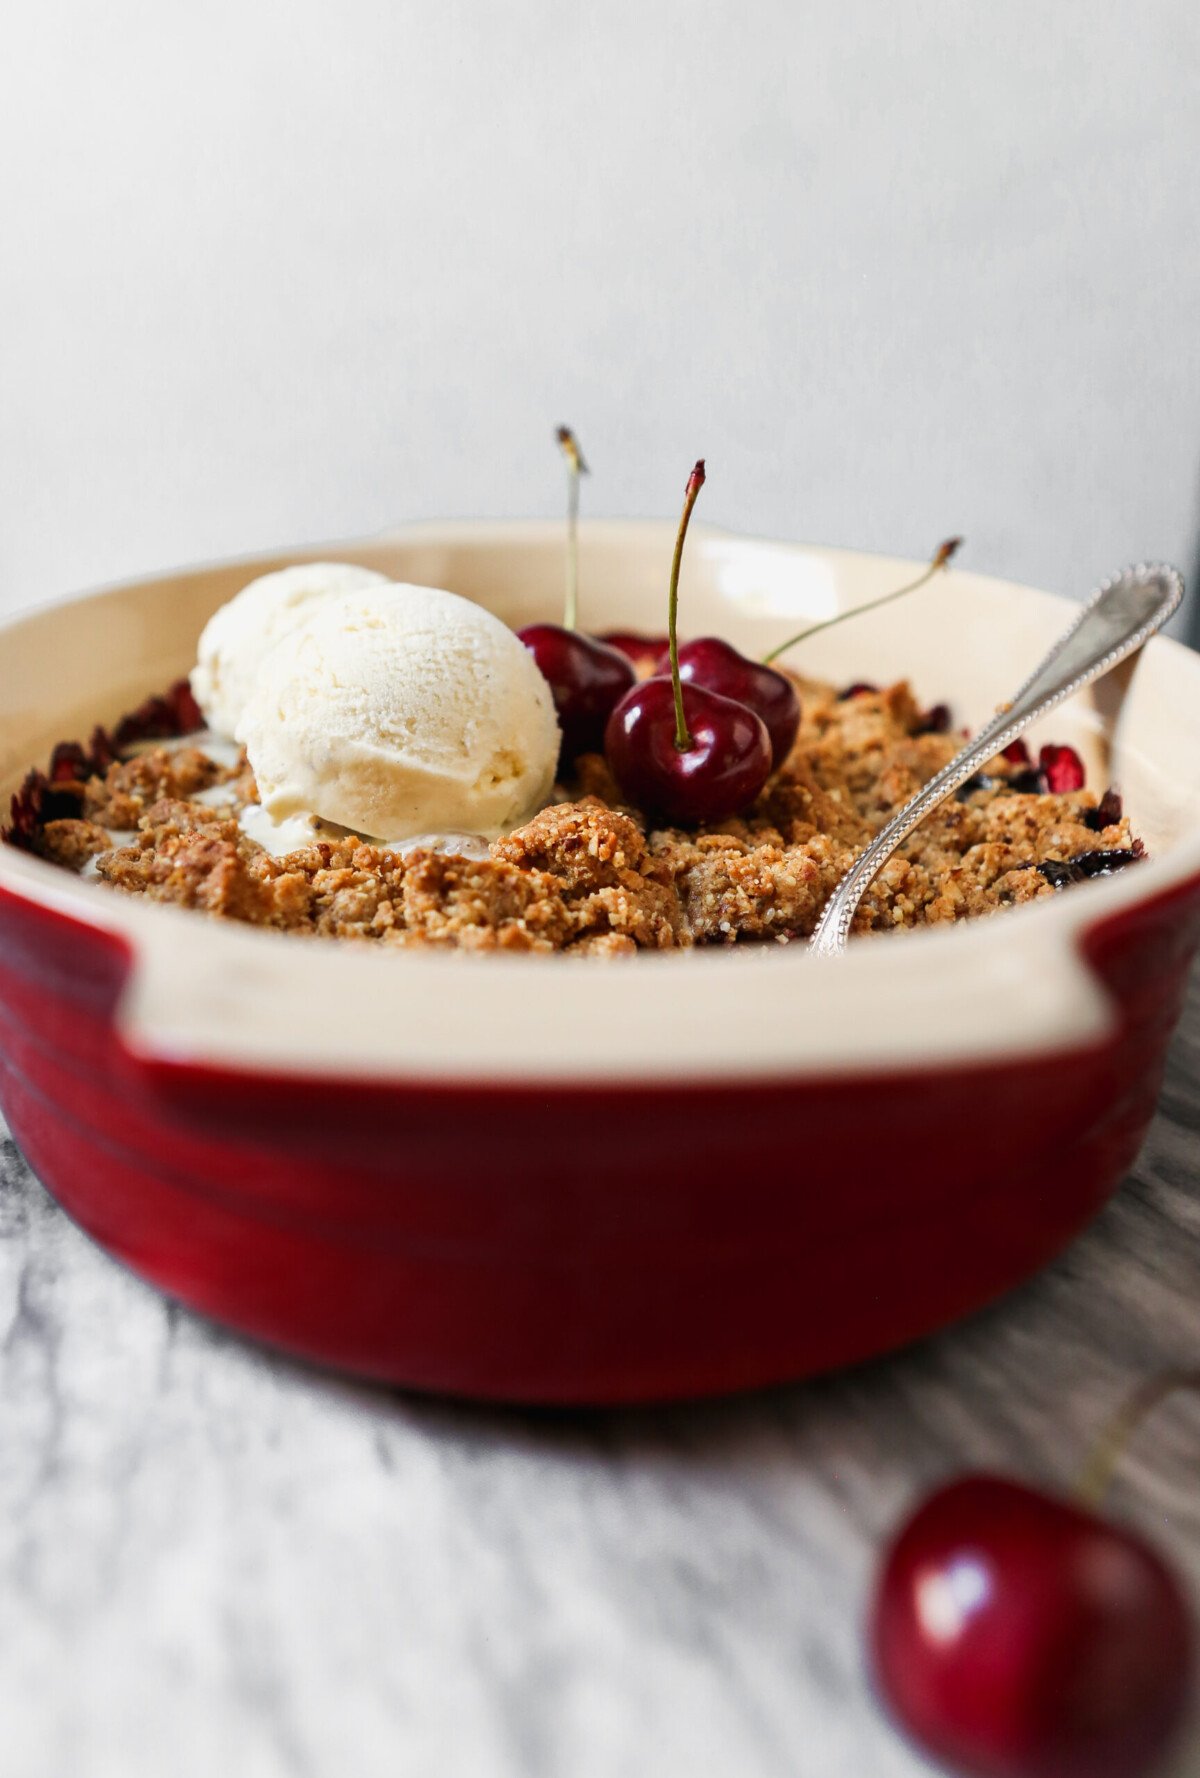 Cherry crisp in an oval baking dish set on a marble surface with servings of cherry crisp and scoops of ice cream in white bowls. 